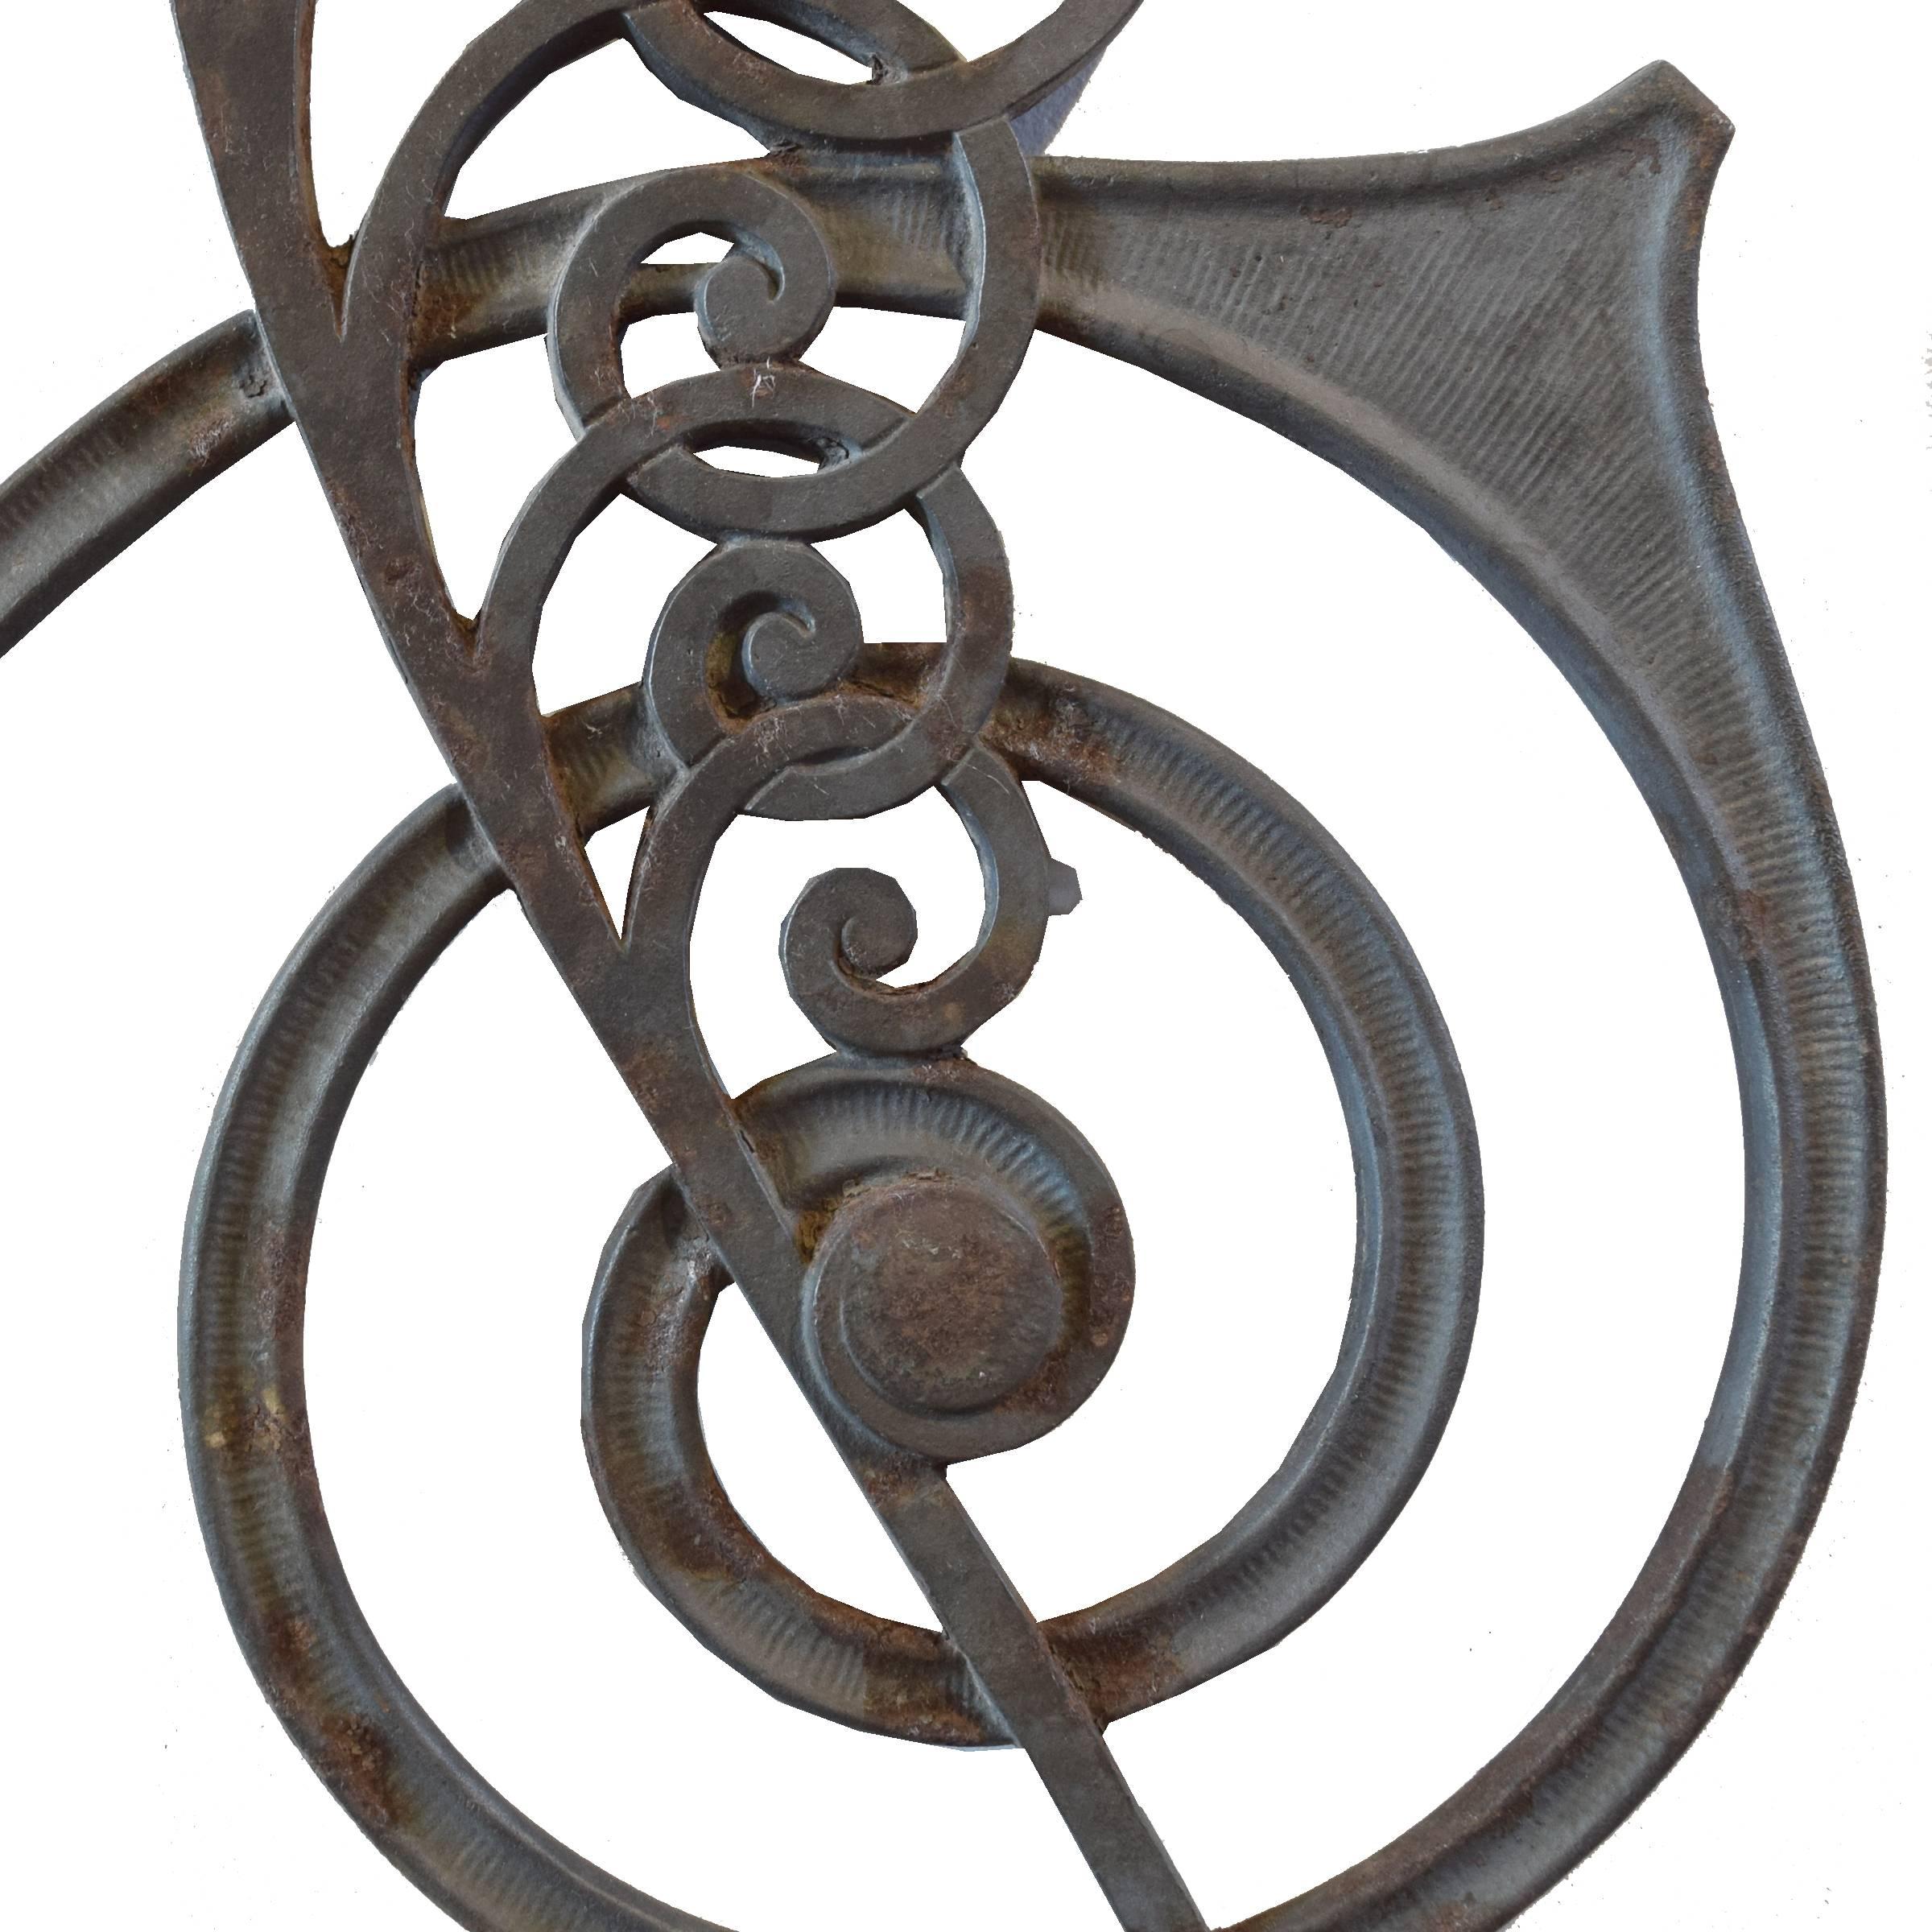 American Cast Iron Stair Balustrade from the Kansas City Board of Trade